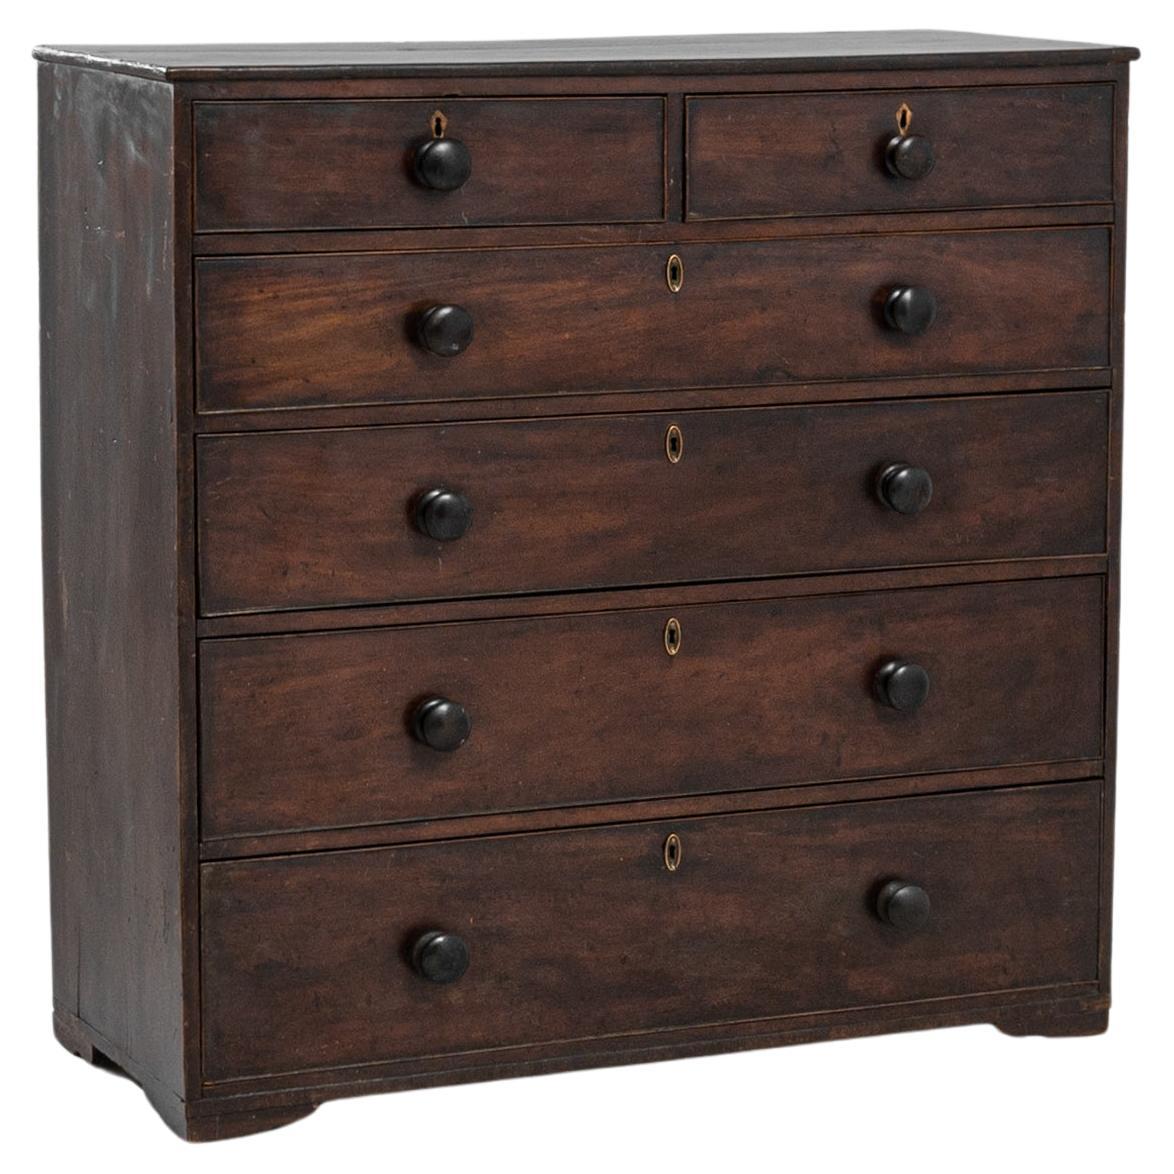 1860s British Wooden Chest of Drawers with Original Patina